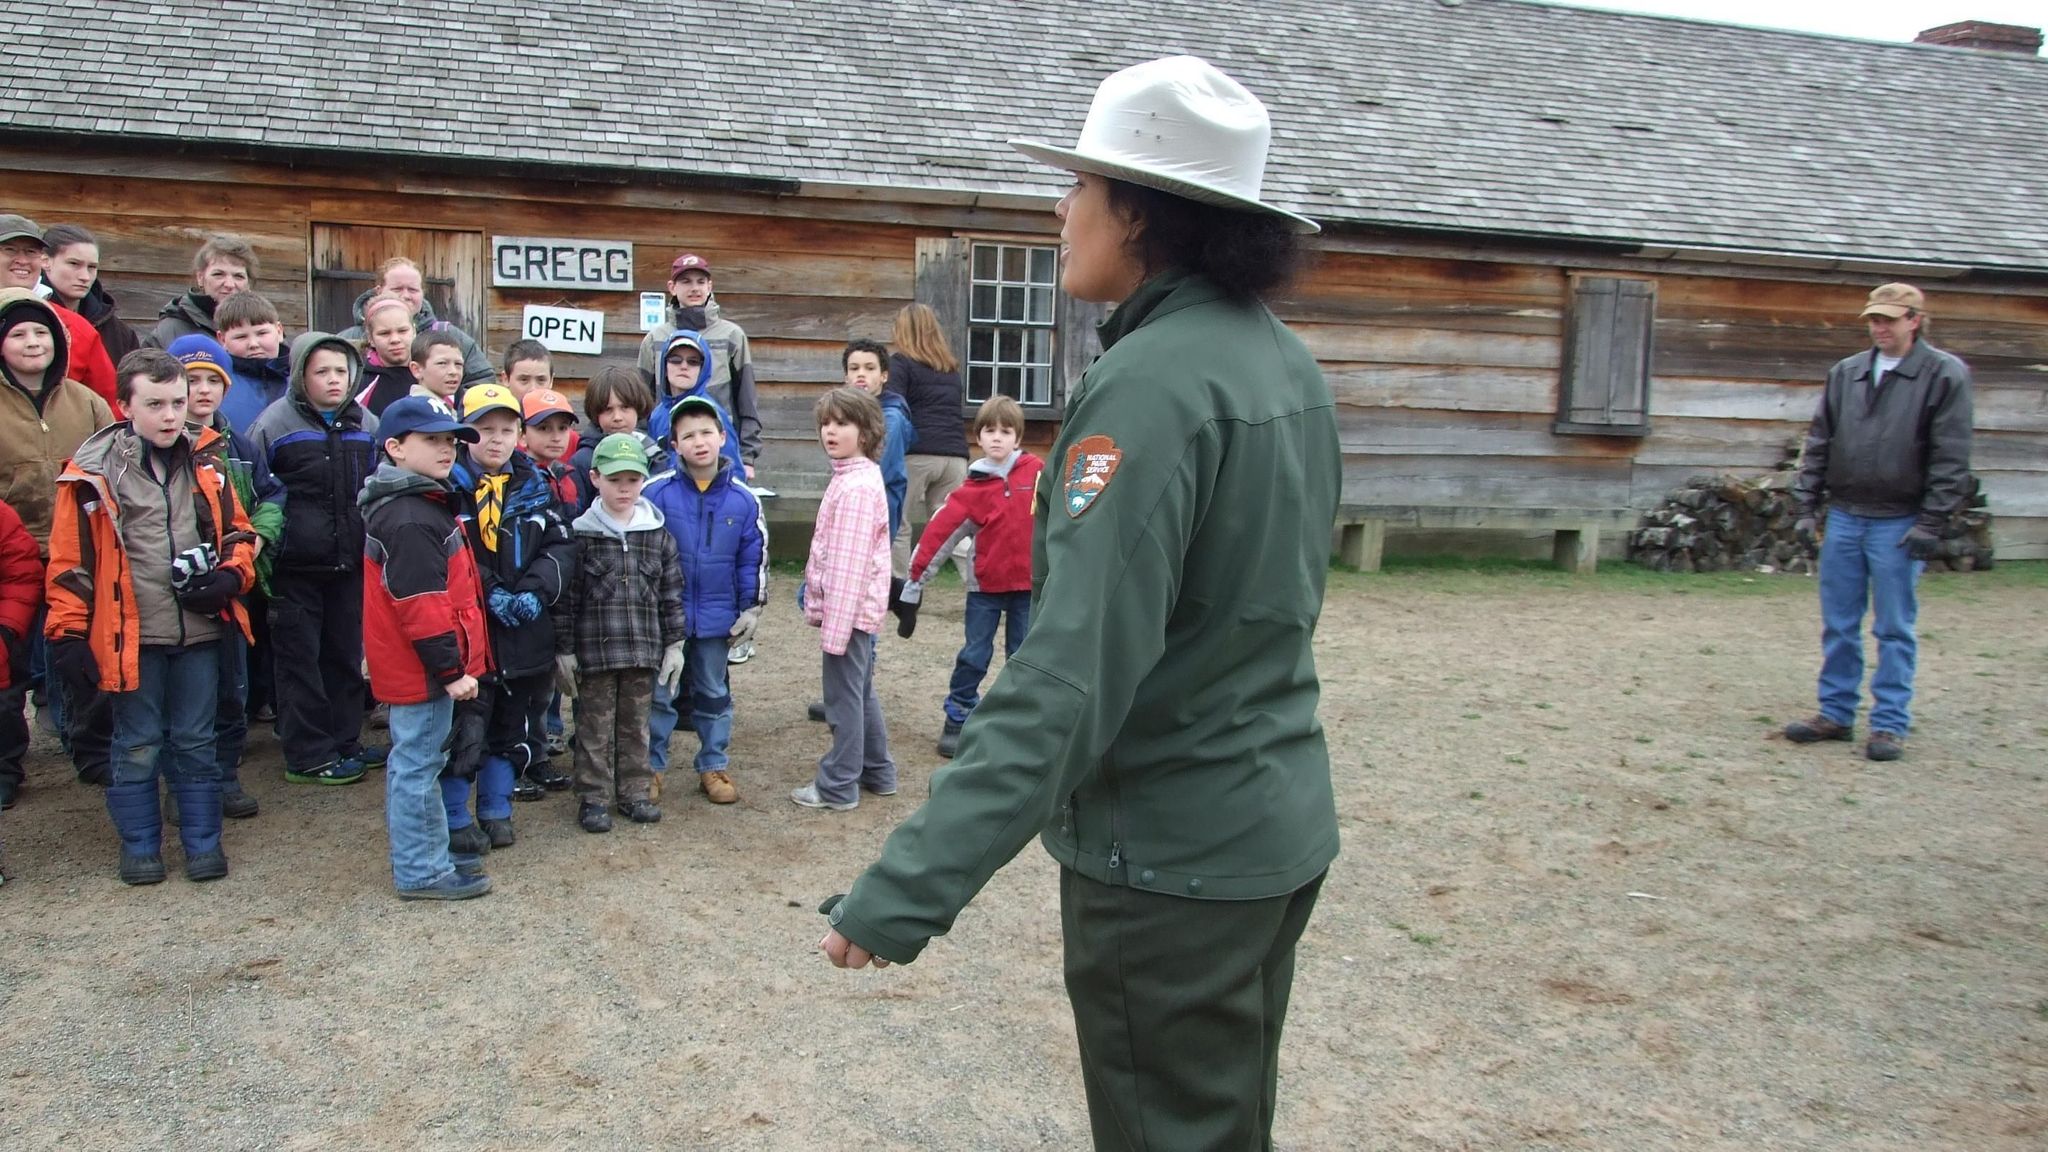 From ranger tours, to walking trails, to exploring history, there's plenty to do at Fort Stanwix!